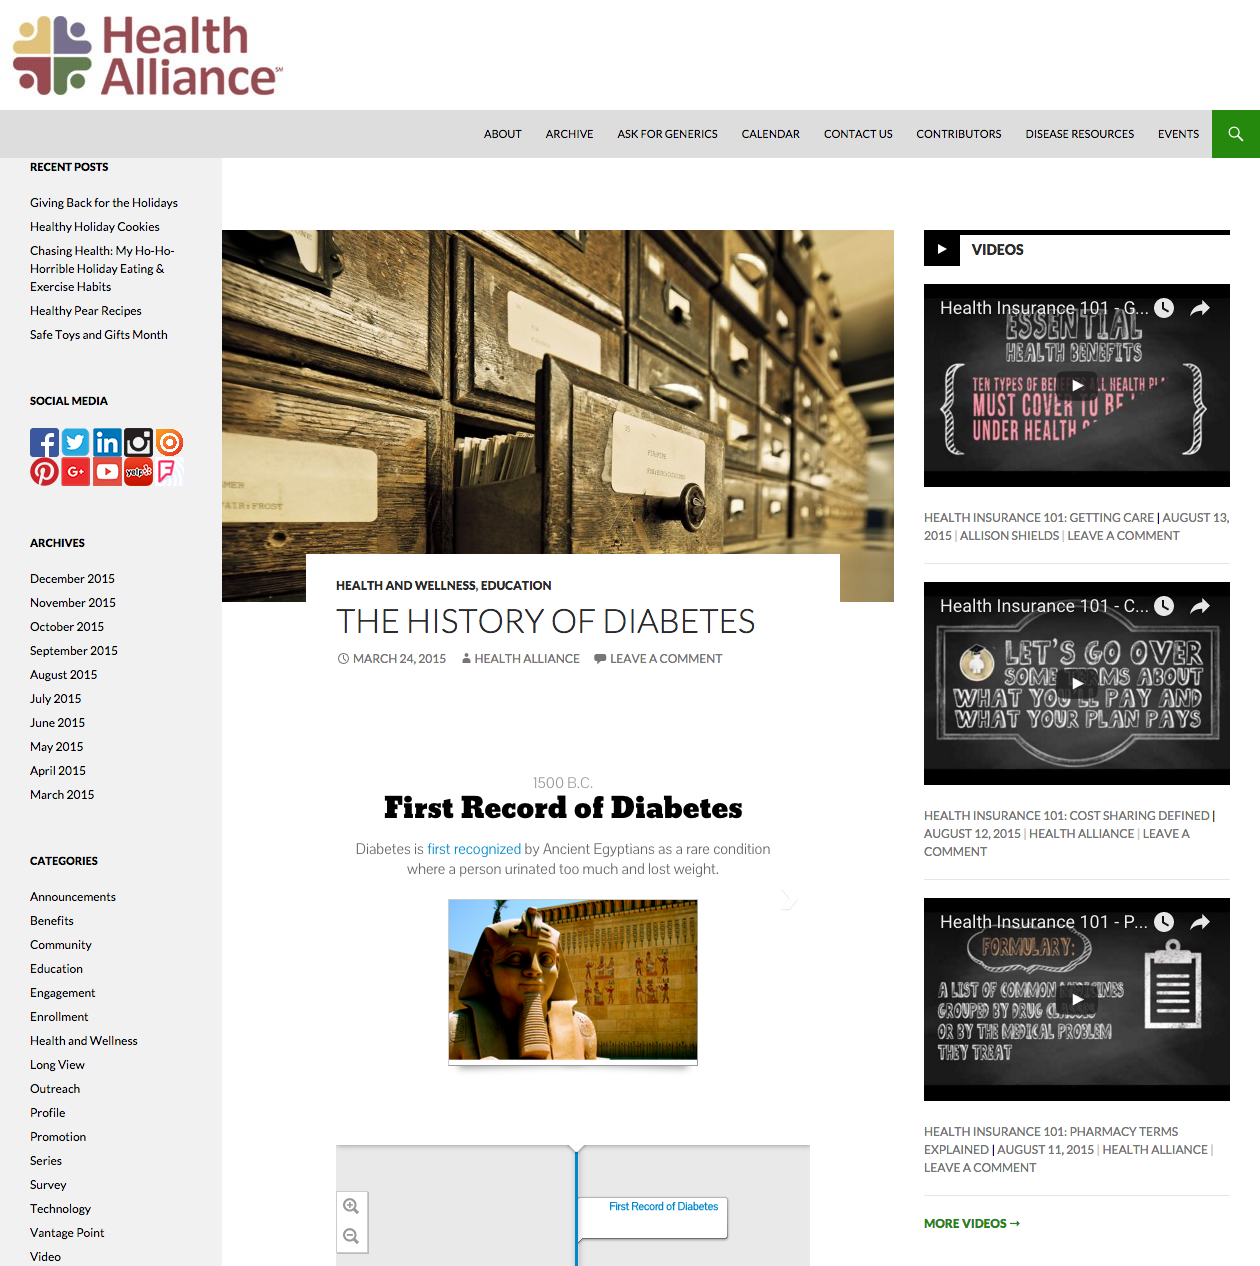 The History of Diabetes Blog Post